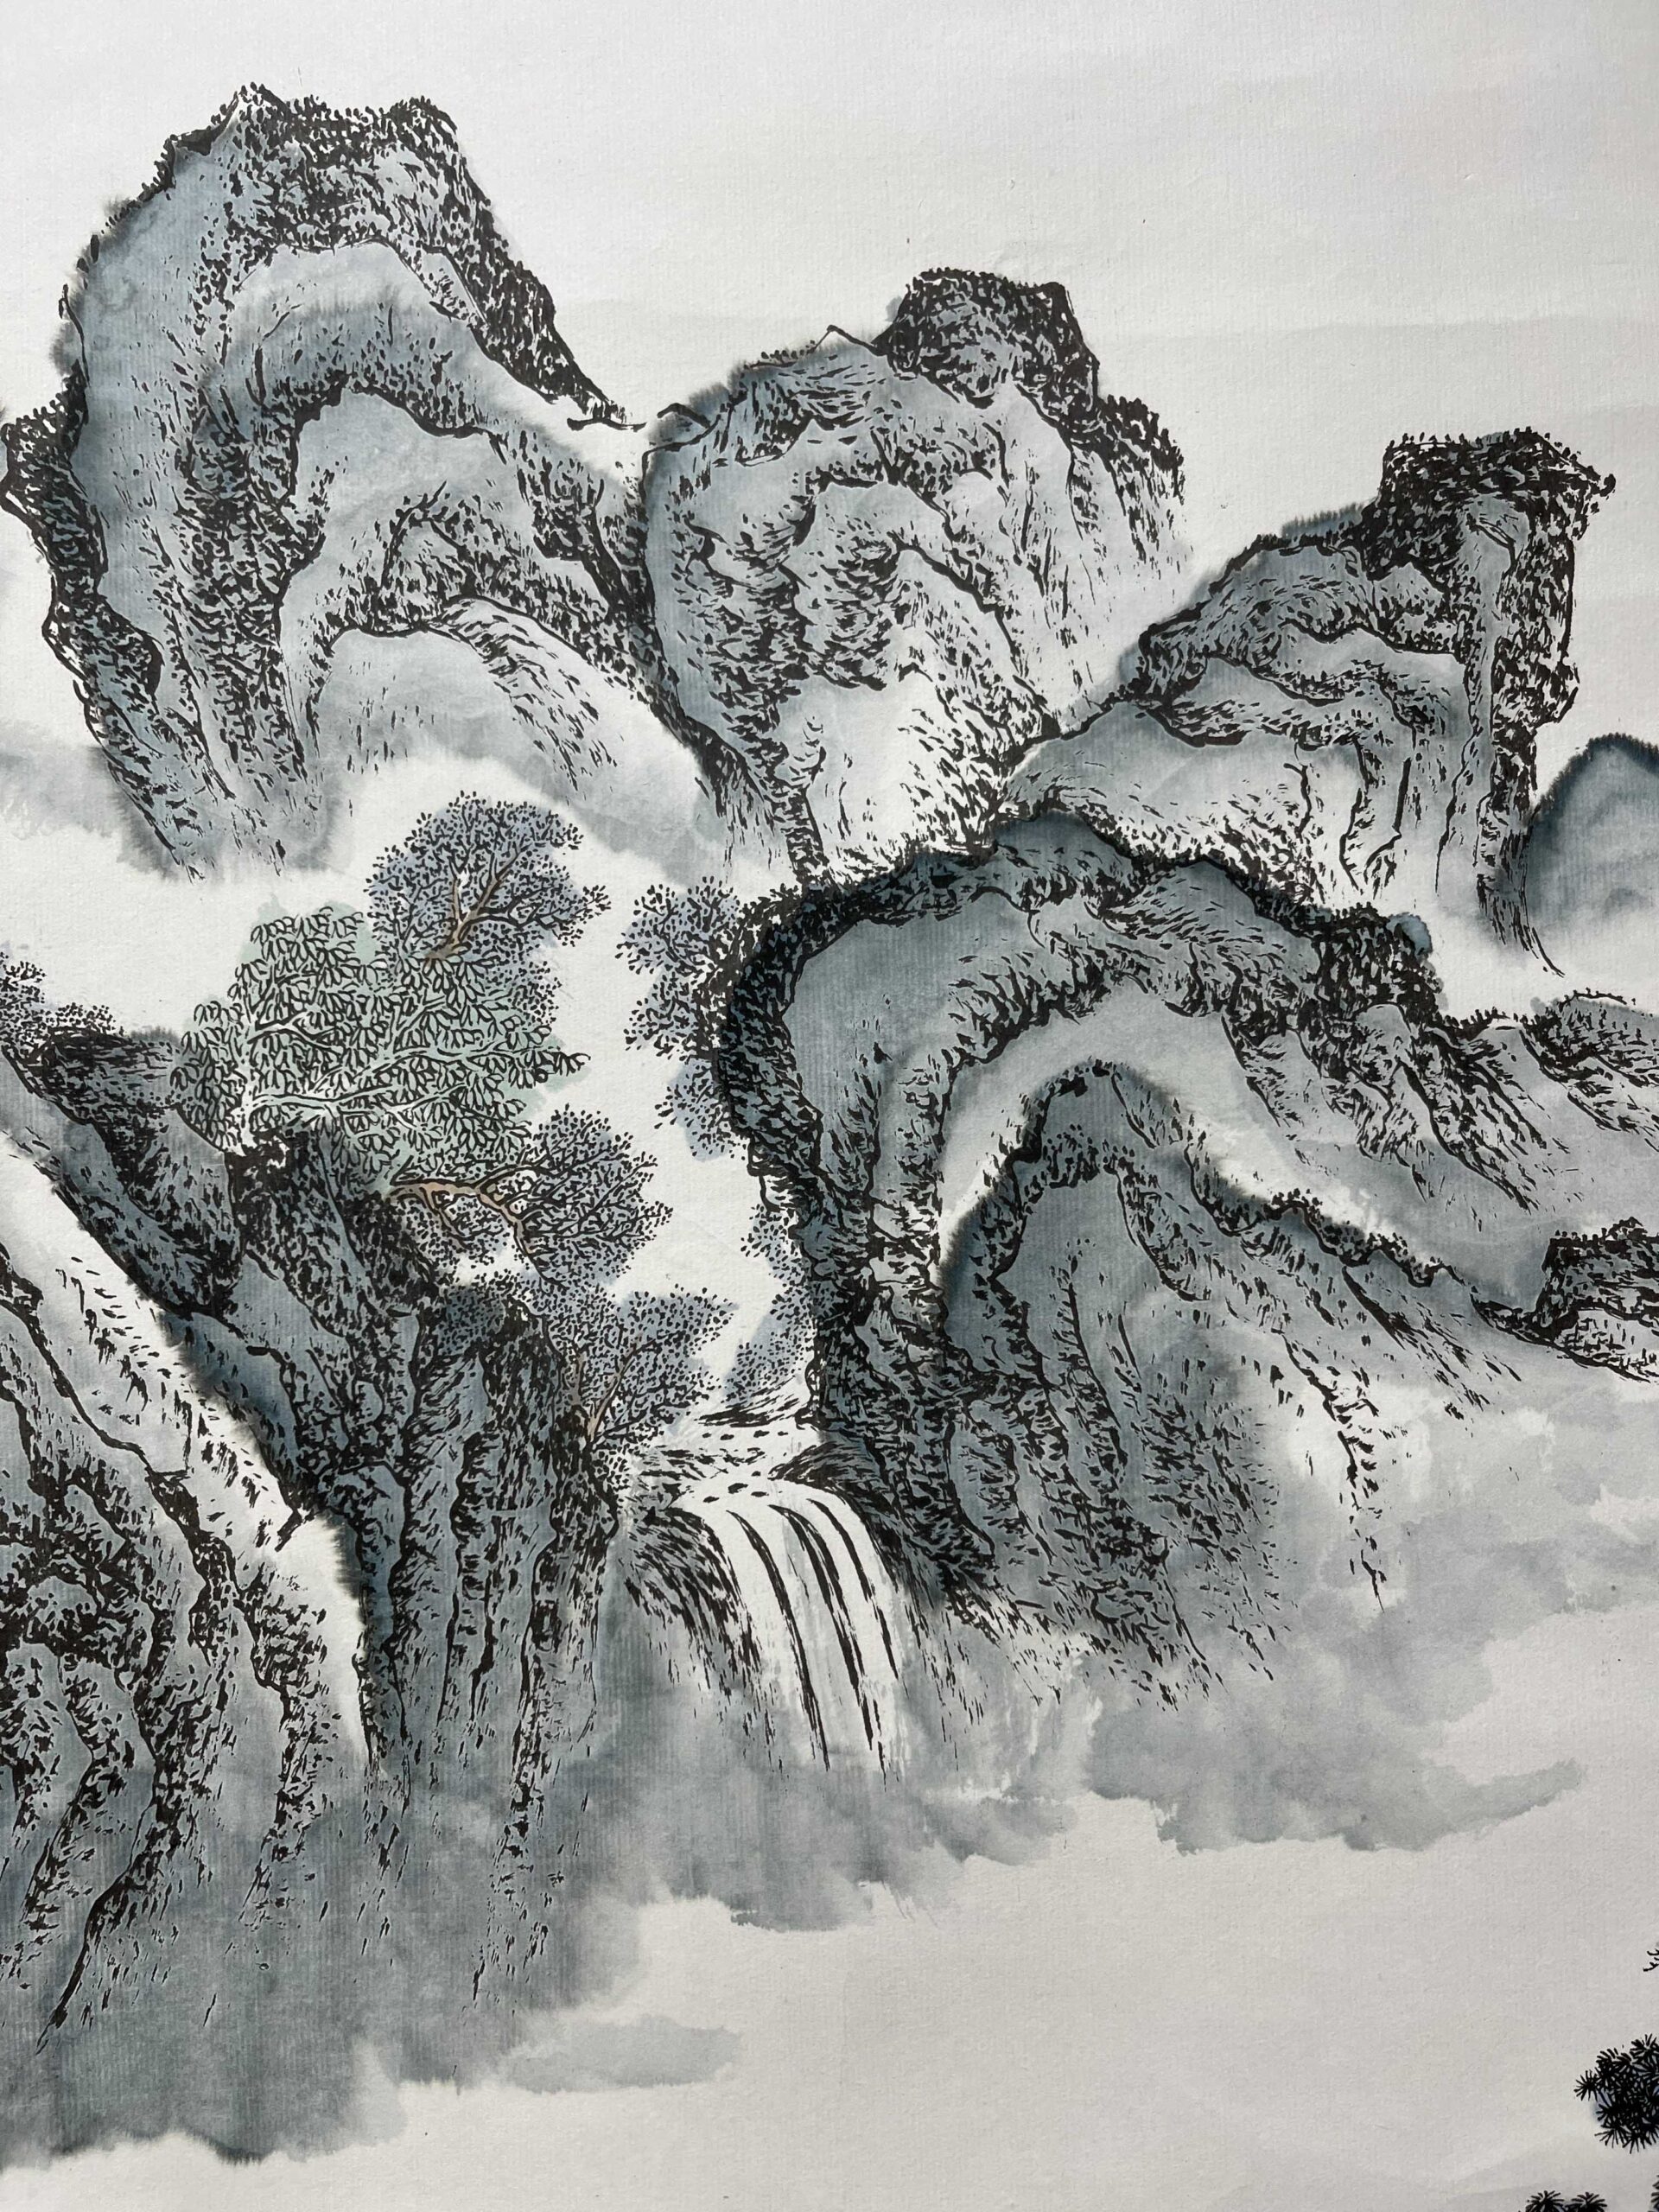 Painting with Zhang Yu mark溪山泛舟图张羽，1959年7月生，河北省武 